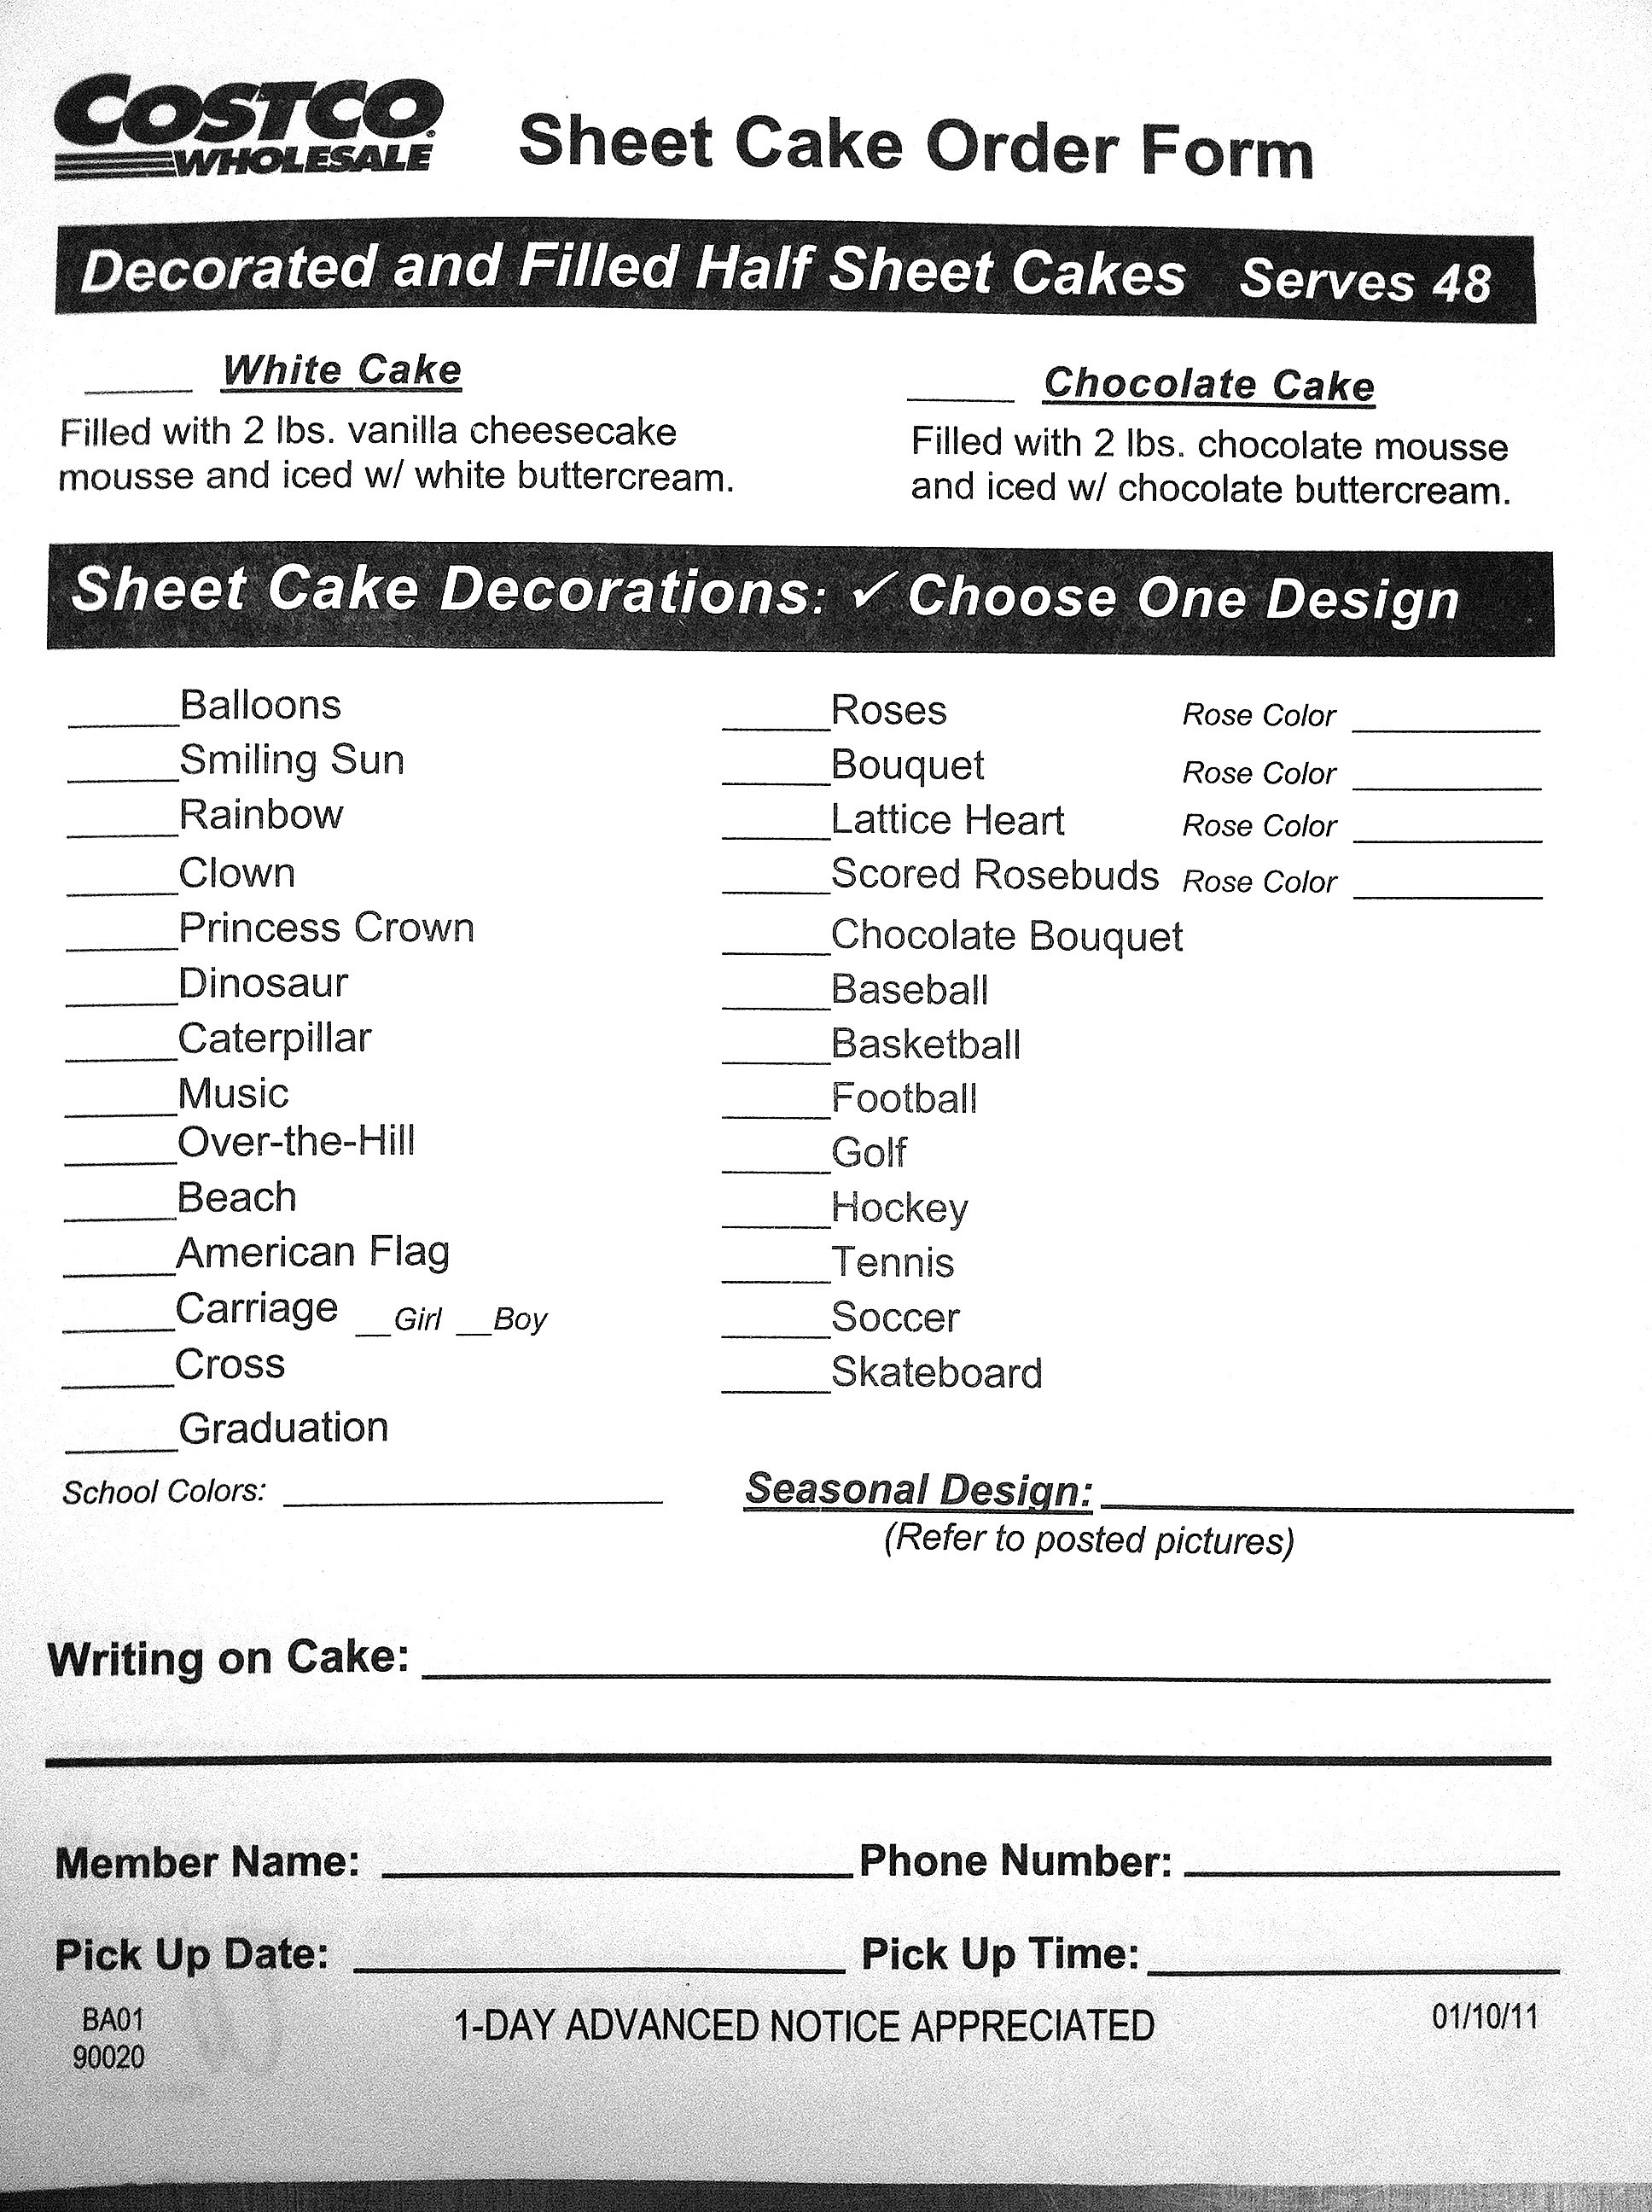 Costco Sheet Cake Prices
 Costco US Bakery Sheet Cake Order Form